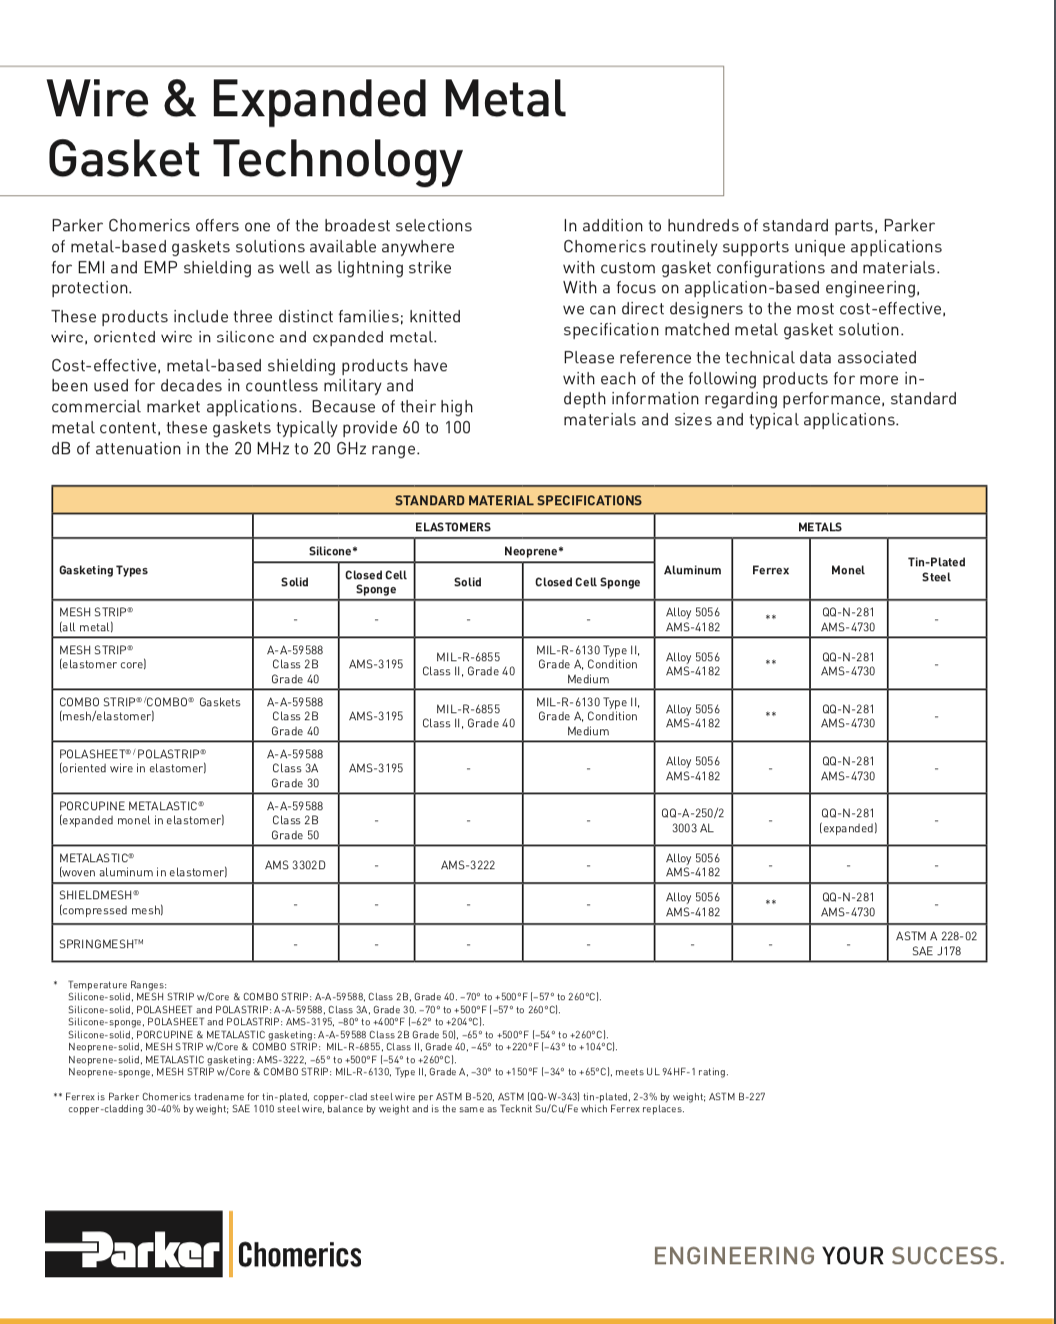 Wire & Expanded Metal Gasket Technology guide